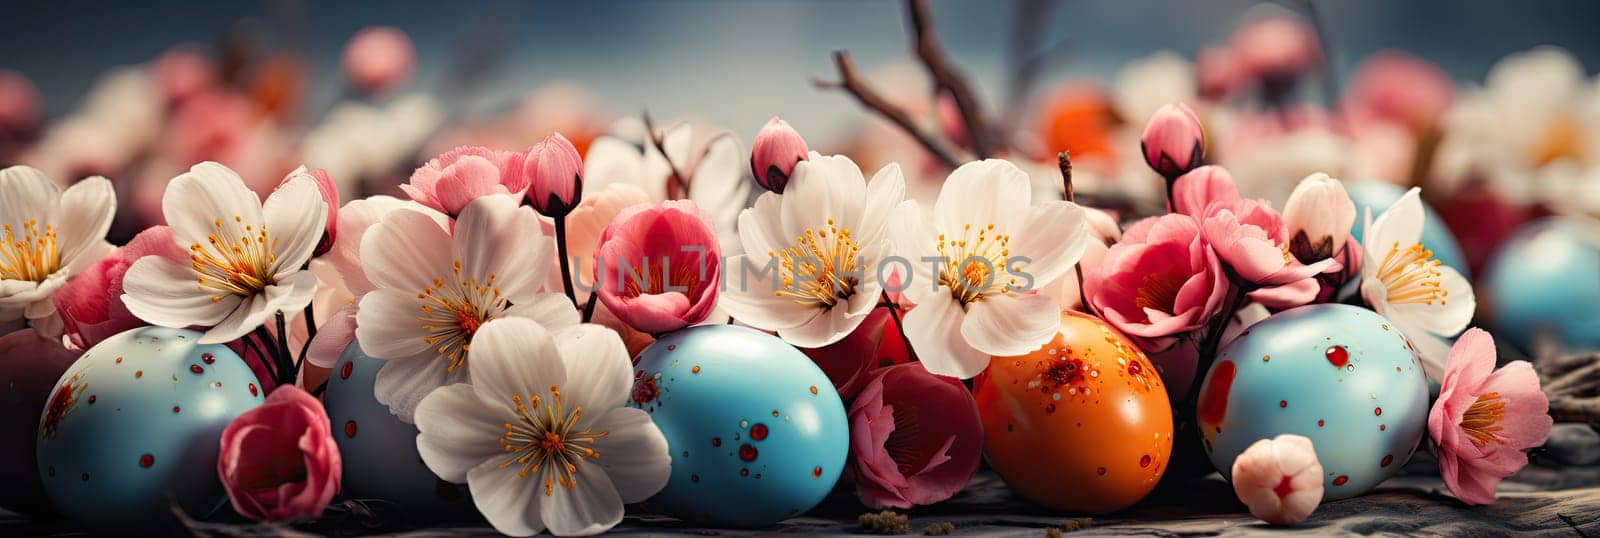 A collection of beautifully decorated Easter eggs in a variety of vibrant colors, decorated with fresh blooming flowers that capture the essence of Easter and the arrival of spring.